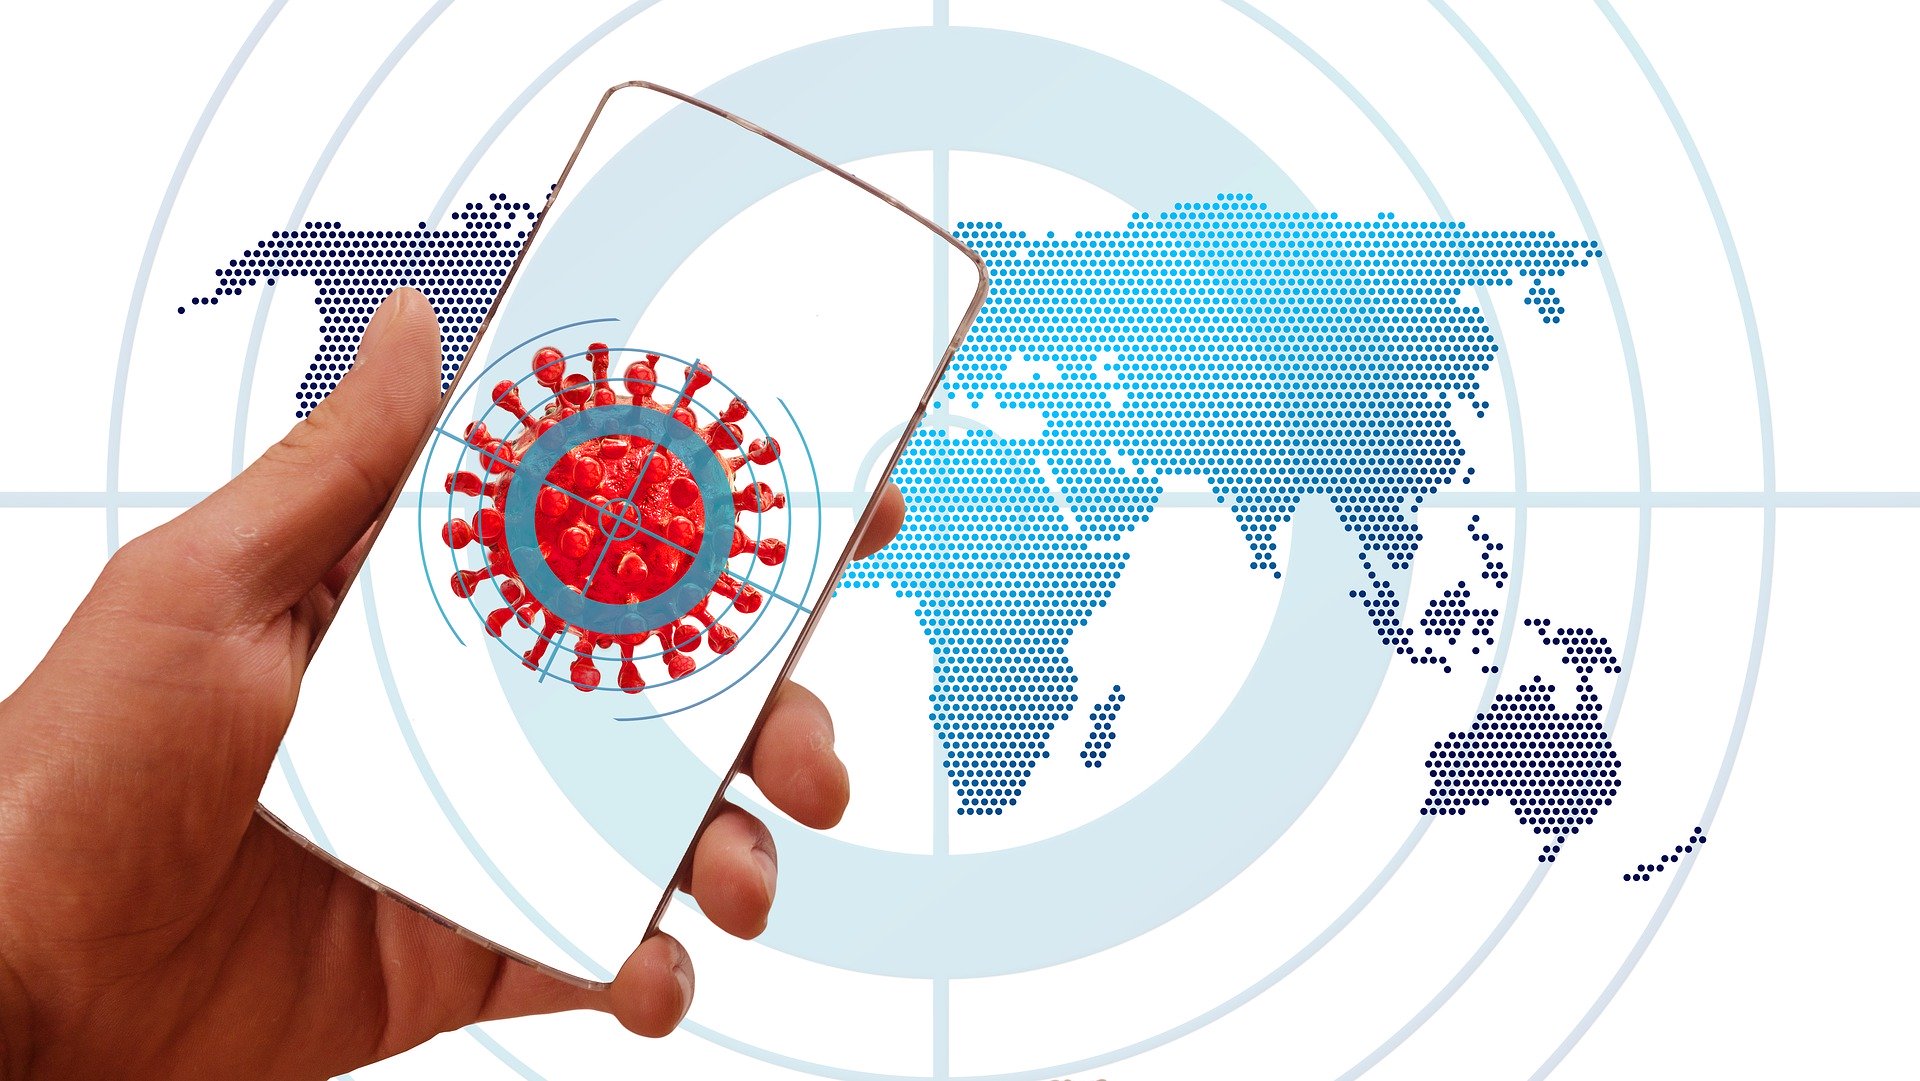 How the Pandemic Has Affected the Global Smartphone Market